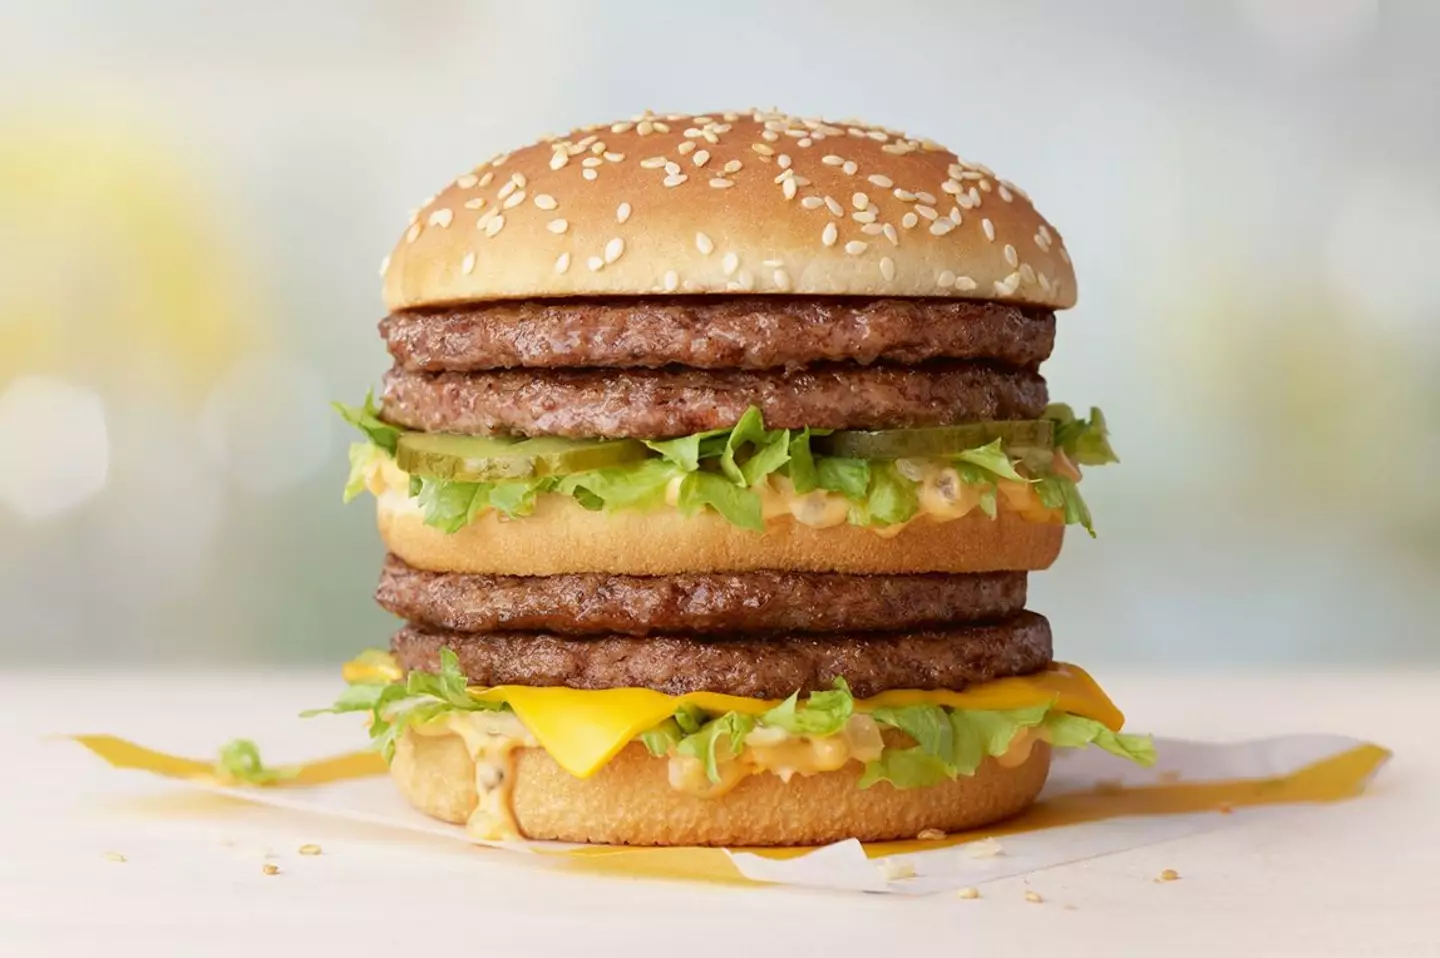 The Double Big Mac is set to return to UK menus this month.